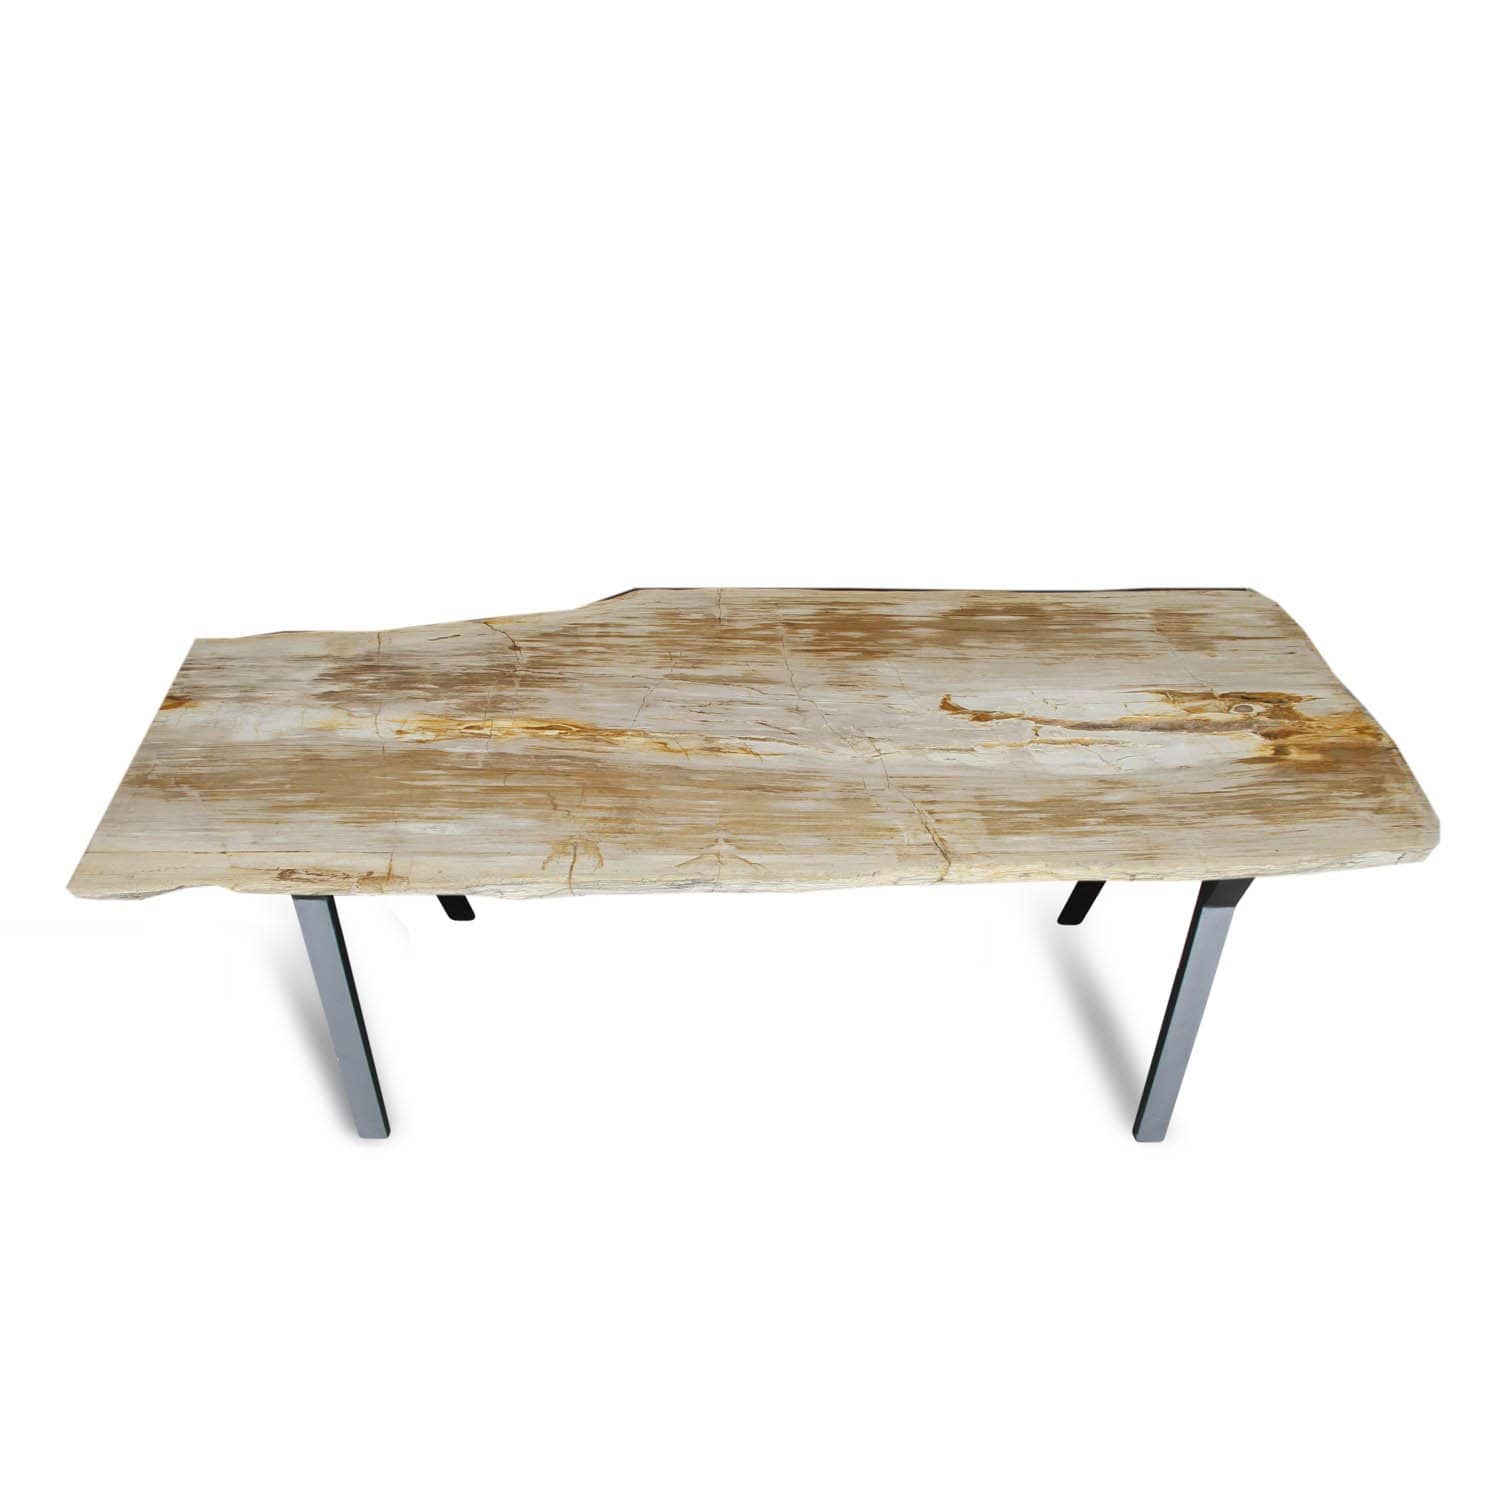 Kalifano Petrified Wood Natural Polished Petrified Wood Rectangular Table Top from Indonesia - 78" / 386 lbs PWR14000.001